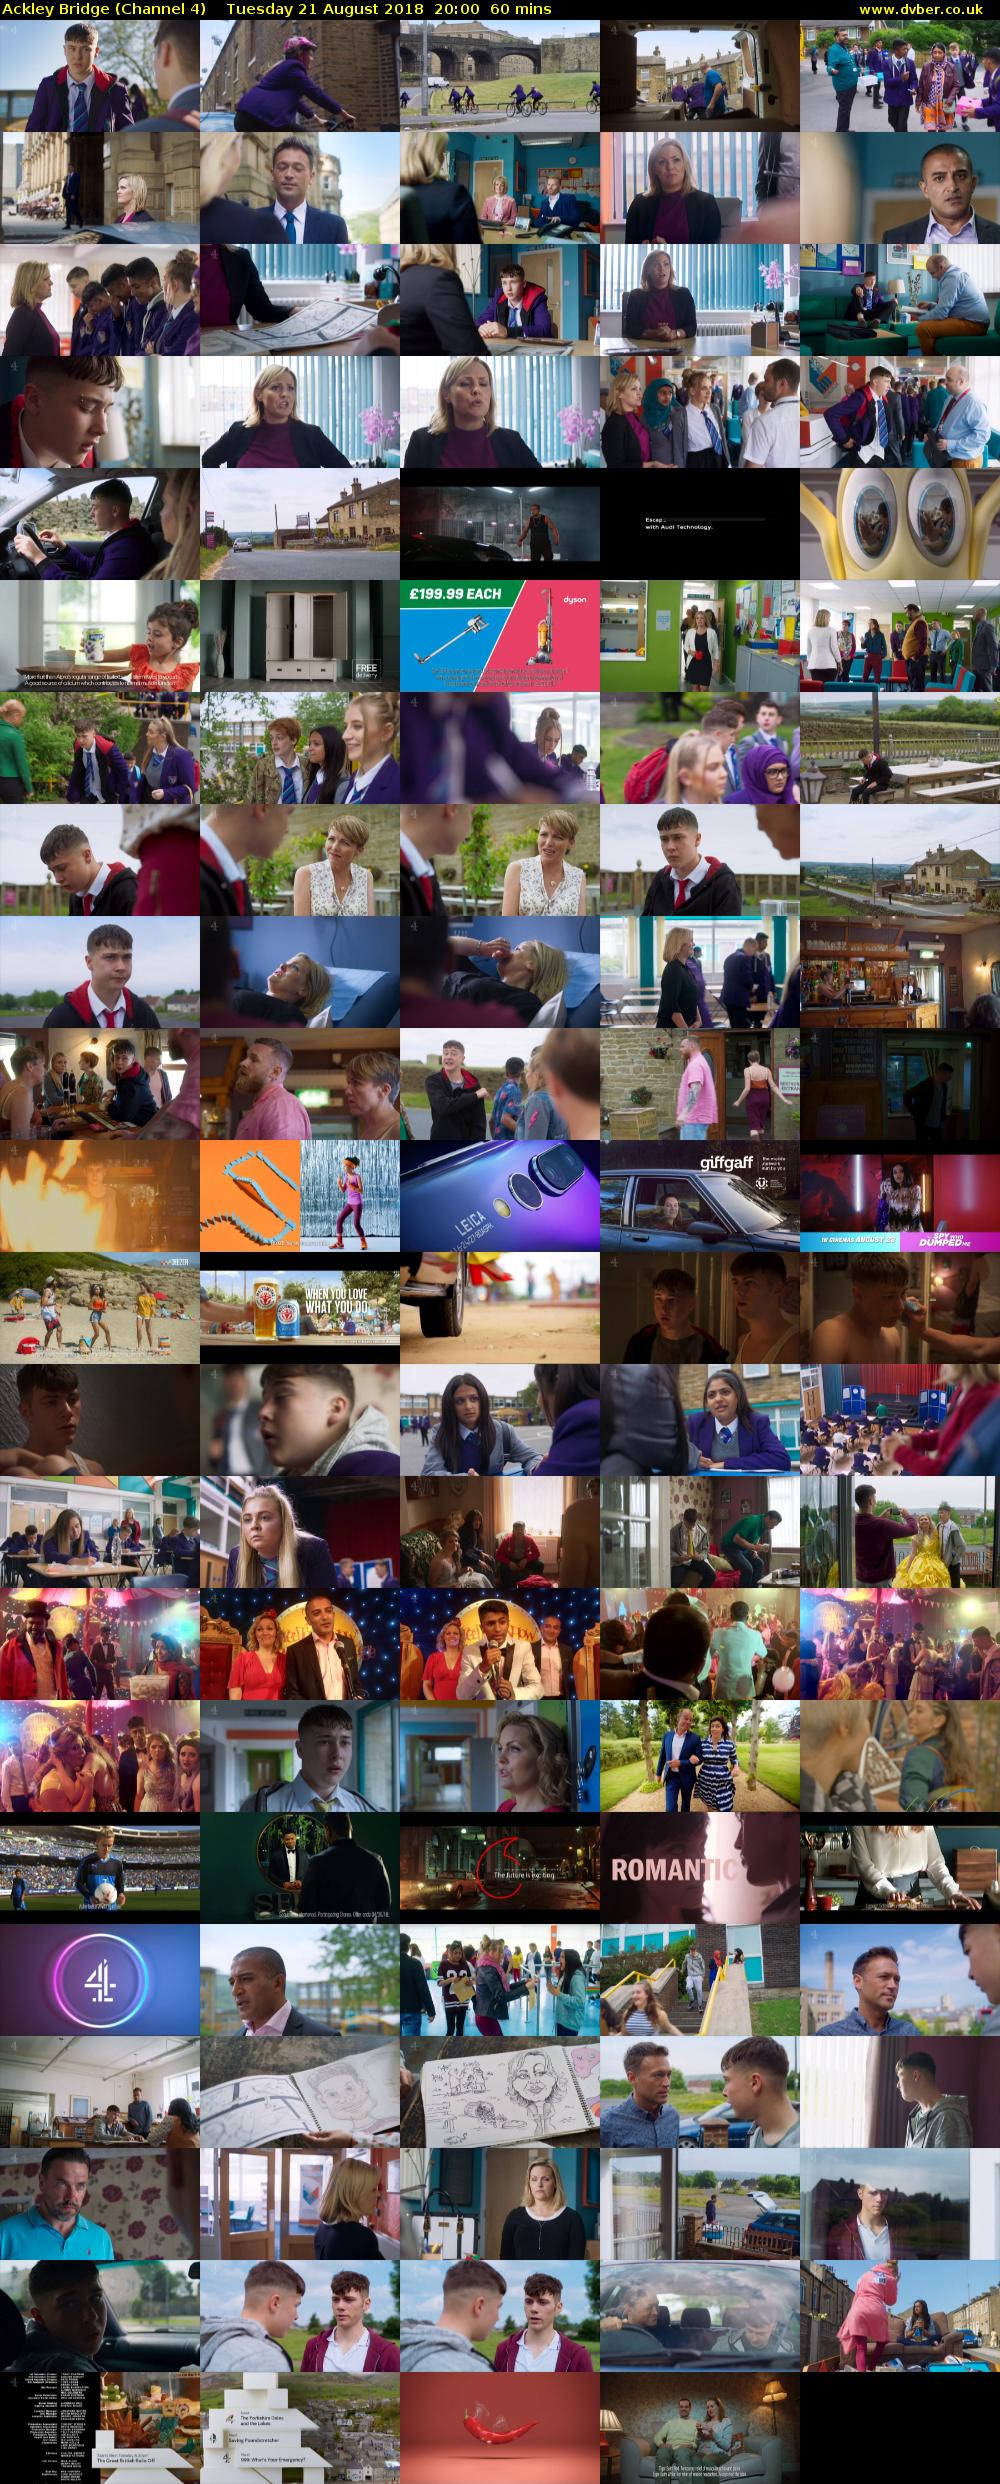 Ackley Bridge (Channel 4) Tuesday 21 August 2018 20:00 - 21:00